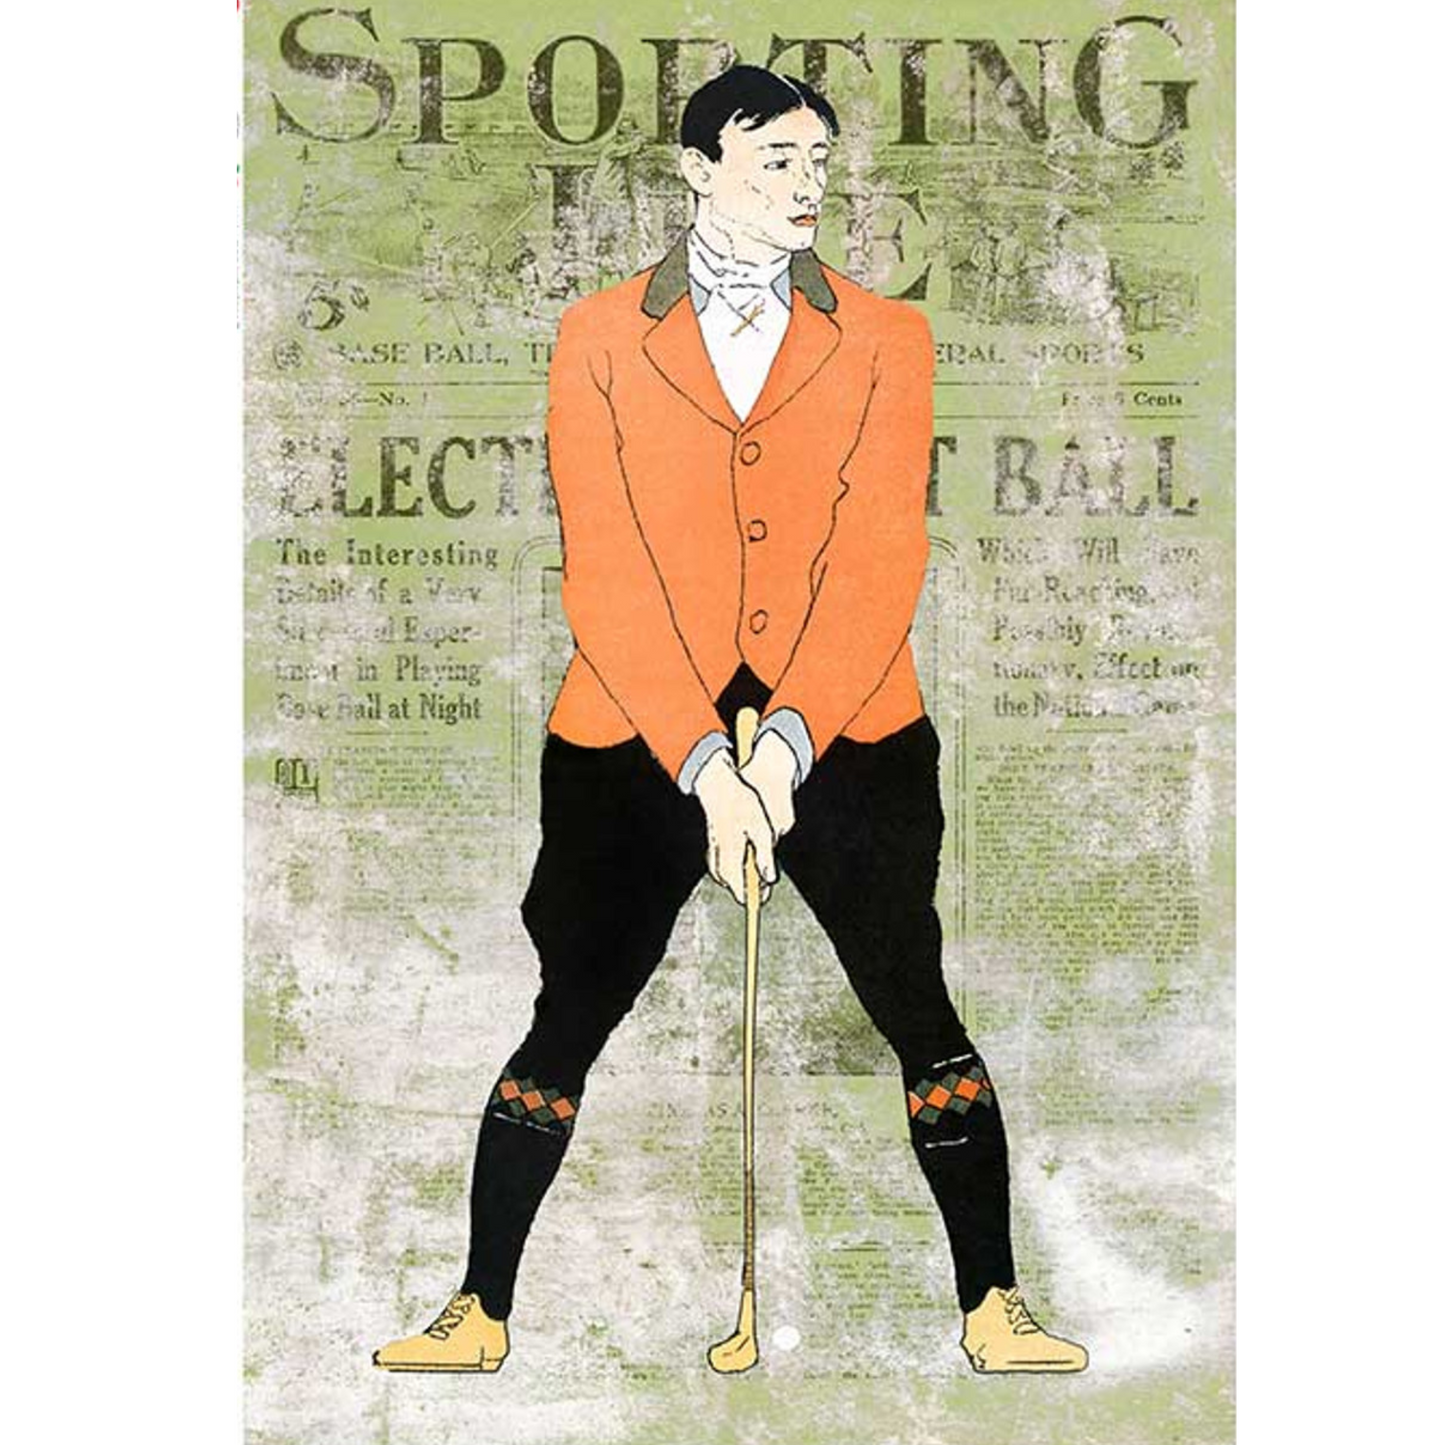 "Golf Poster" decoupage rice paper by Paper Designs available at Milton's Daughter.